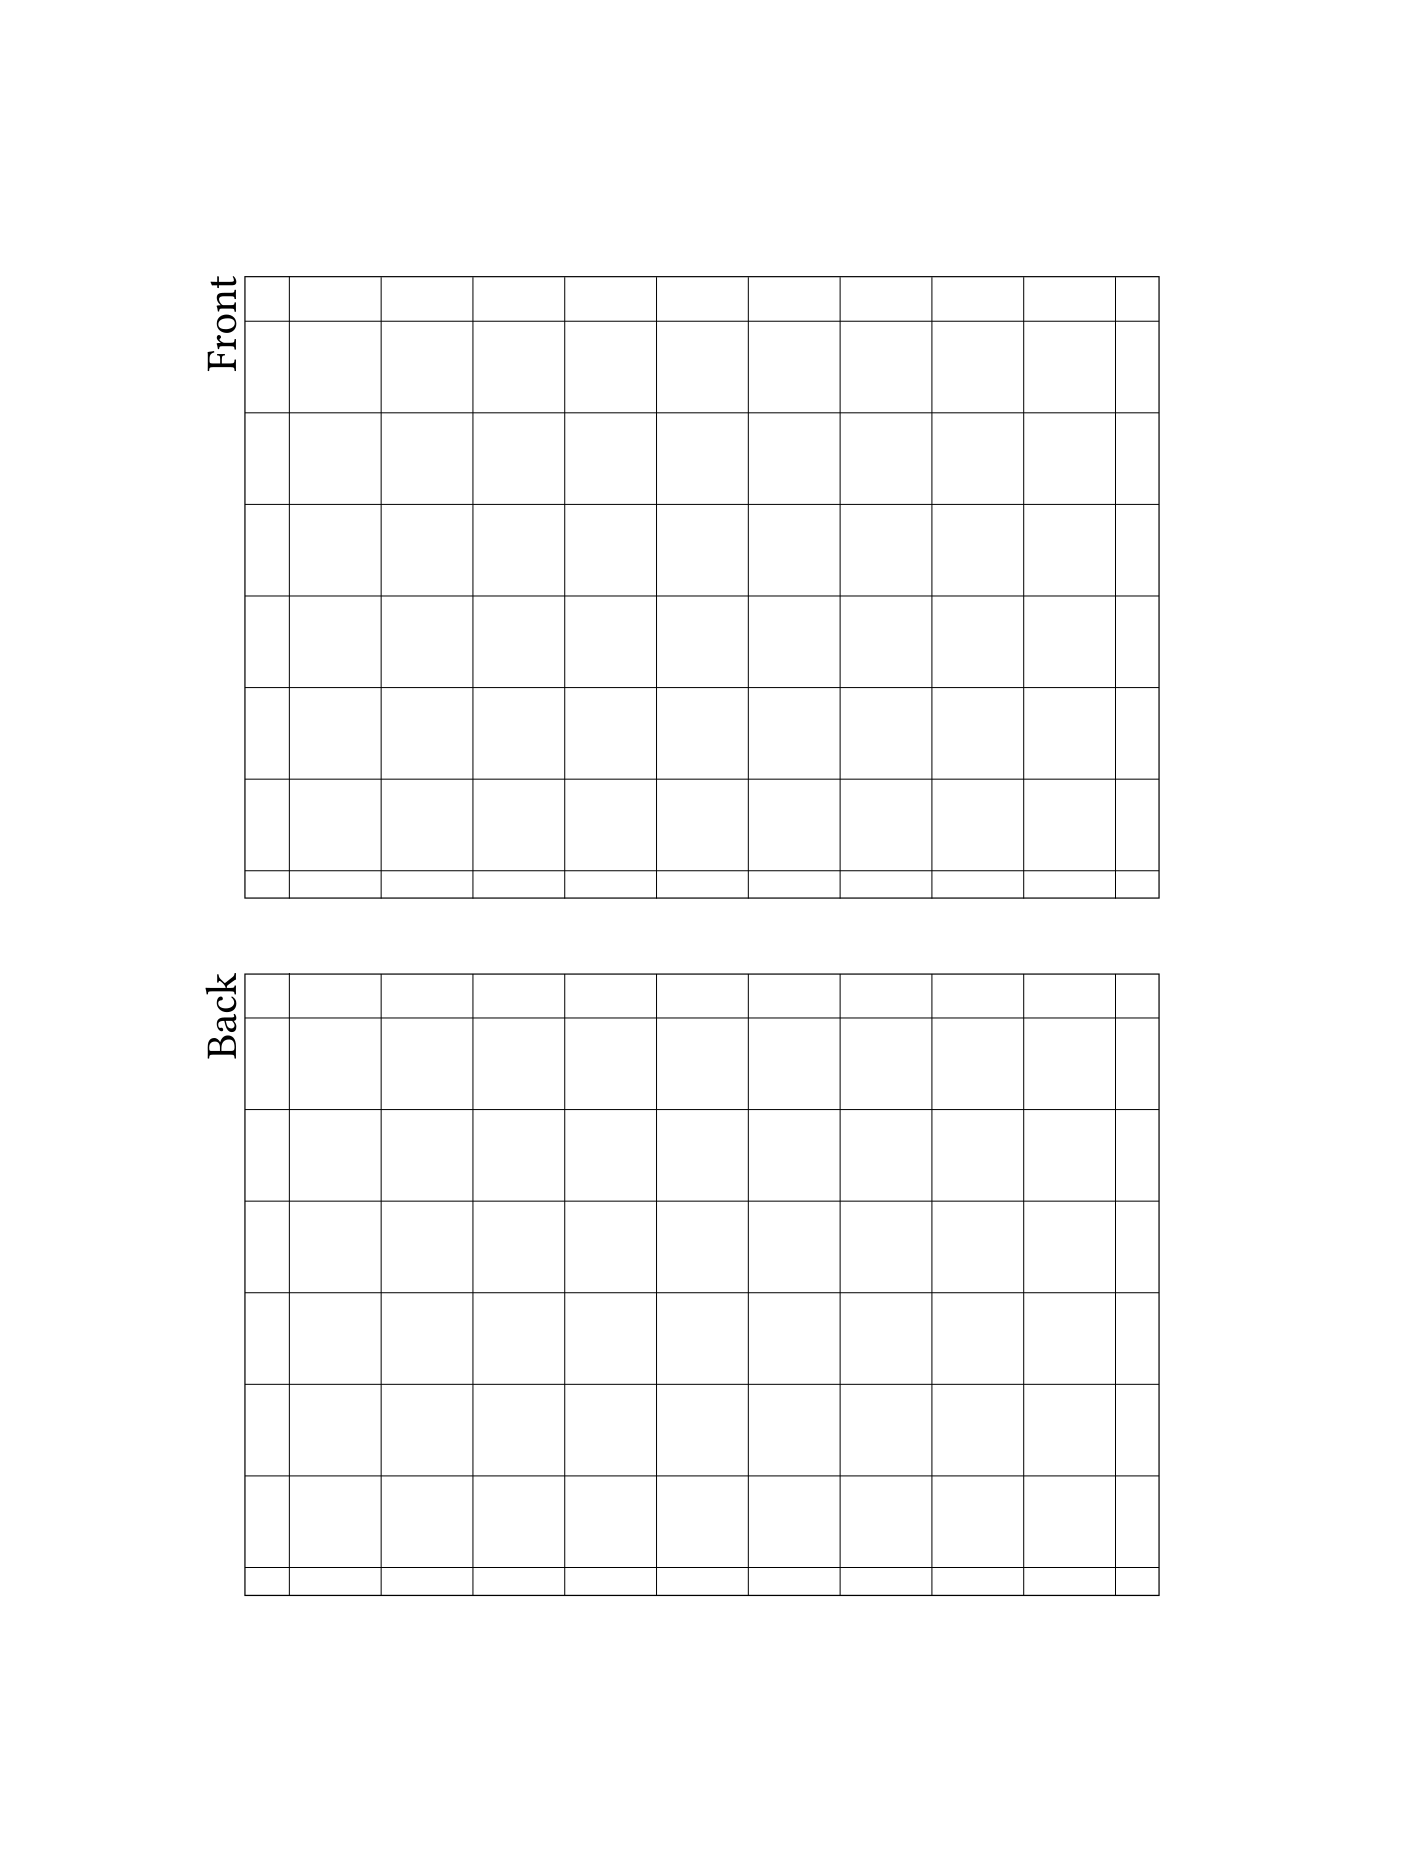 The flashcard template with two rectangles labeled 'front' and 'back'.